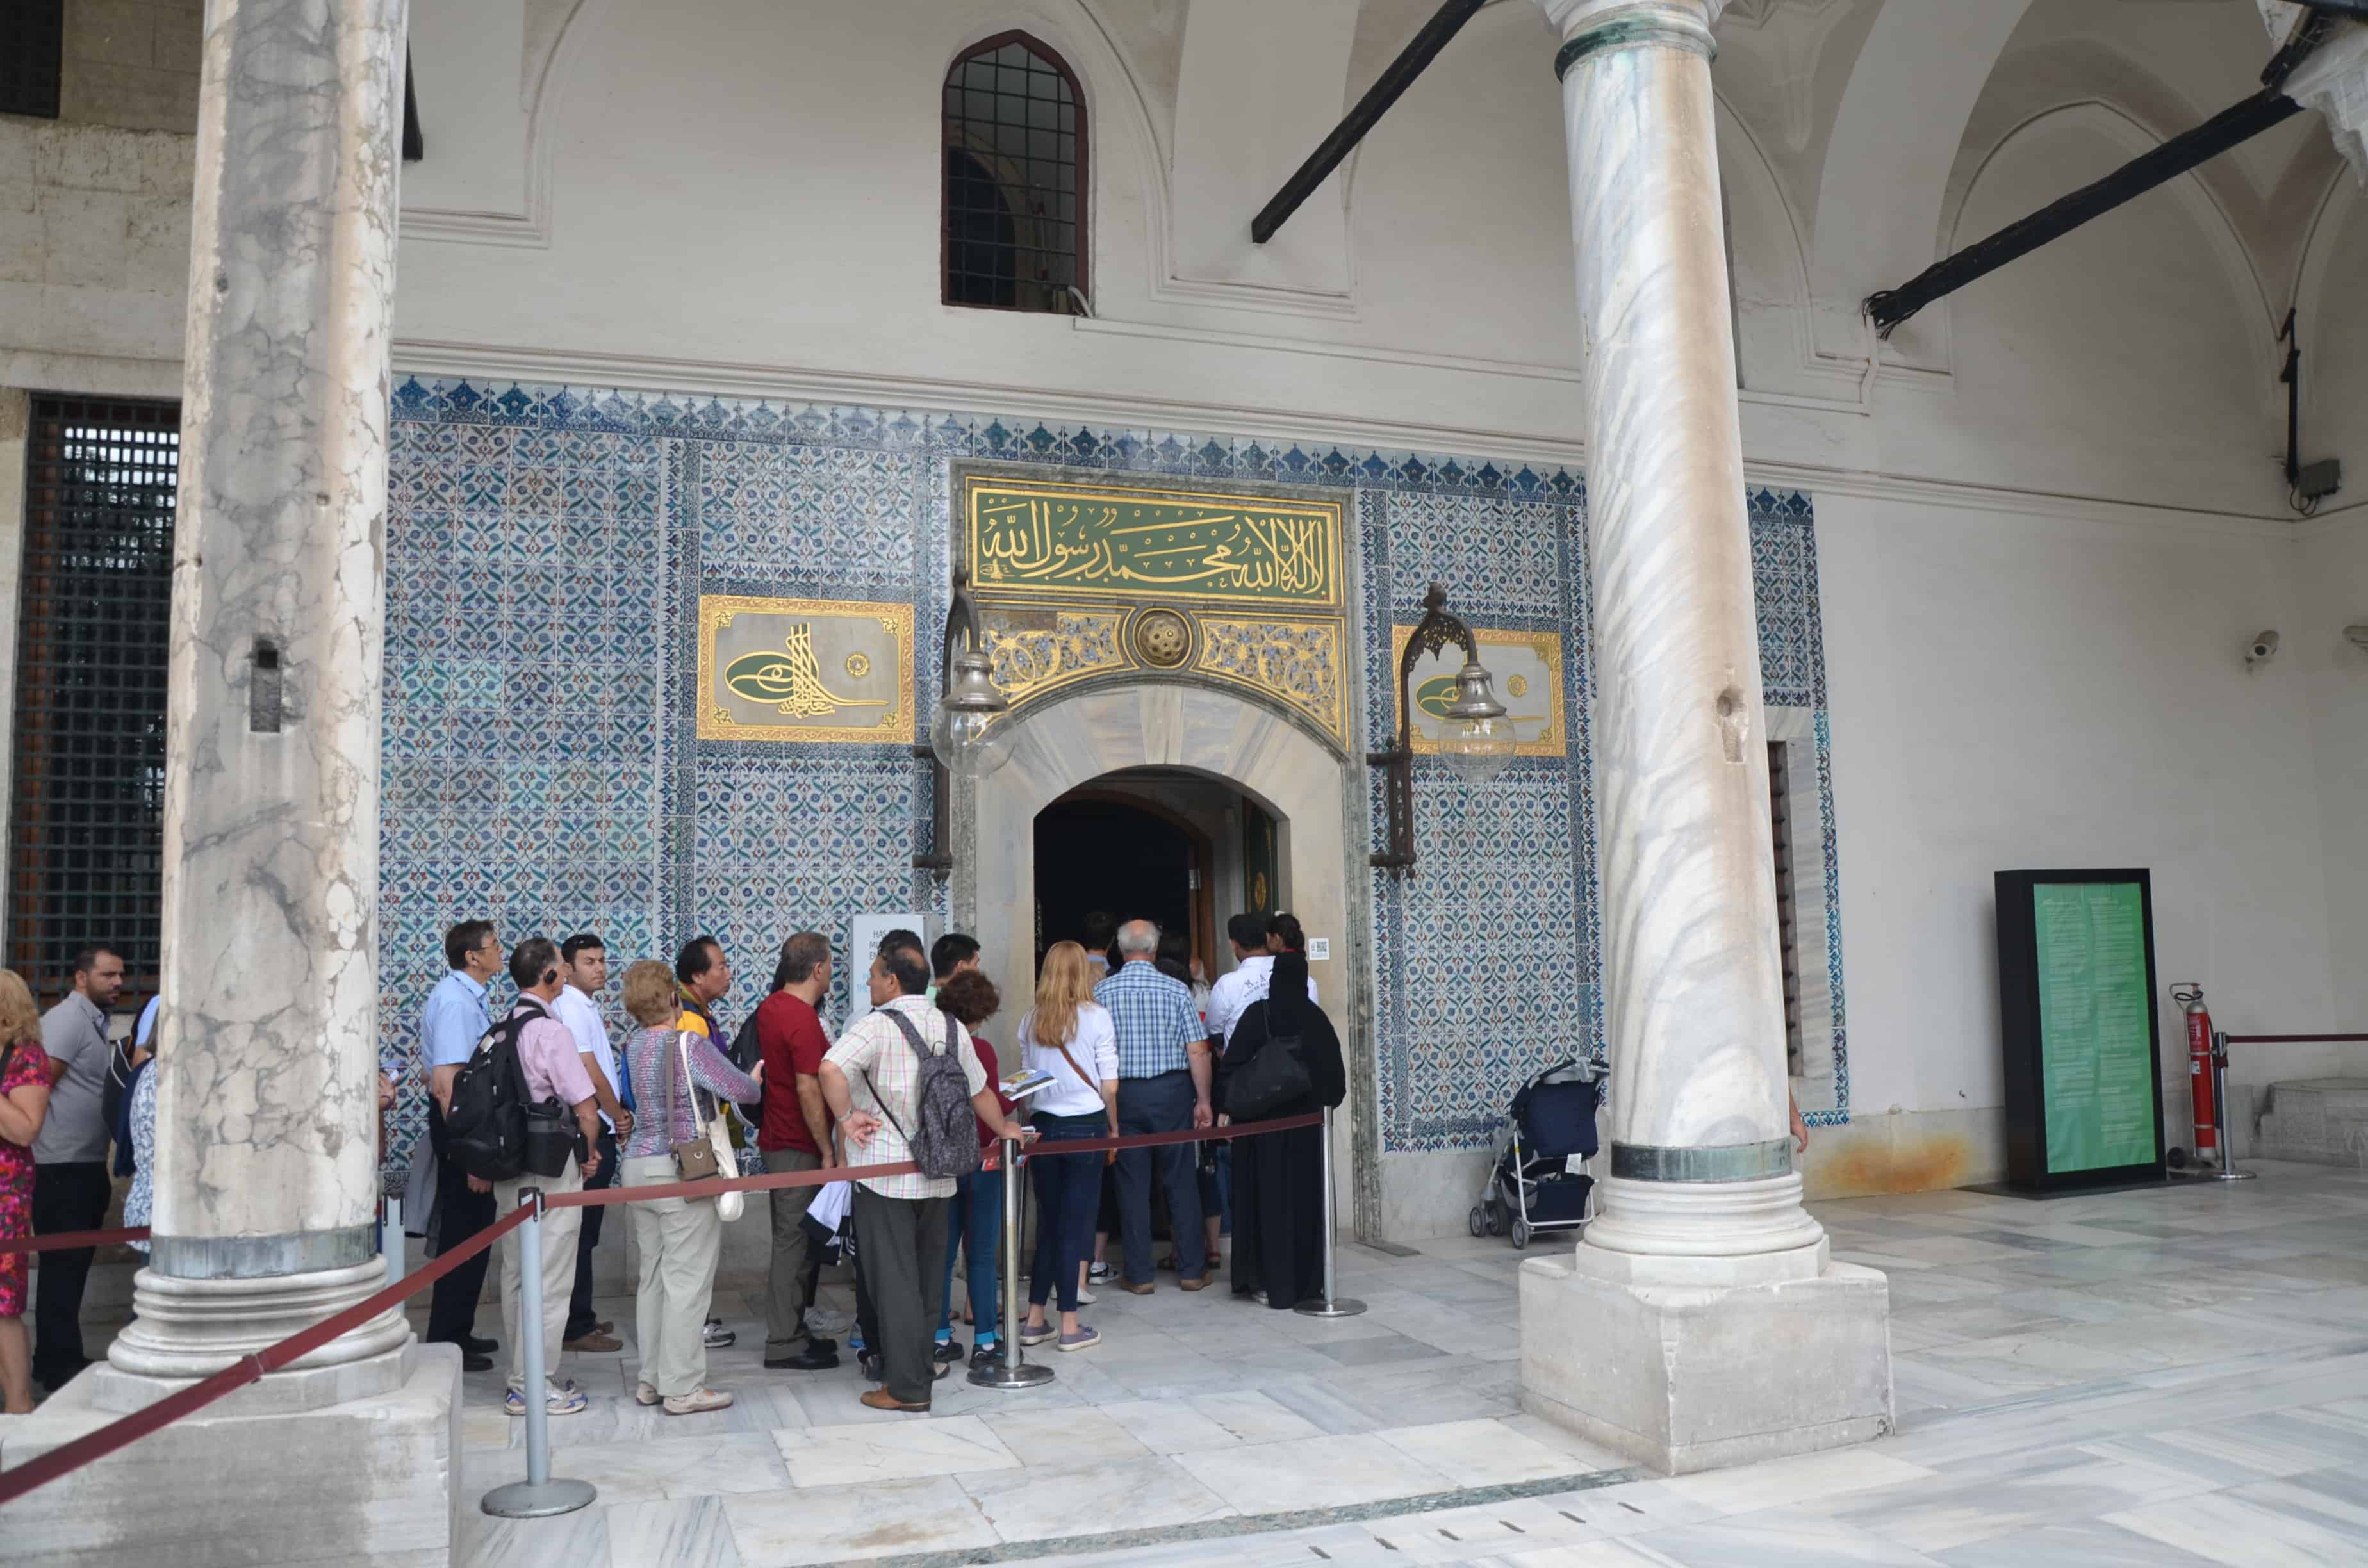 Chamber of the Sacred Relics at Topkapi Palace in Istanbul, Turkey